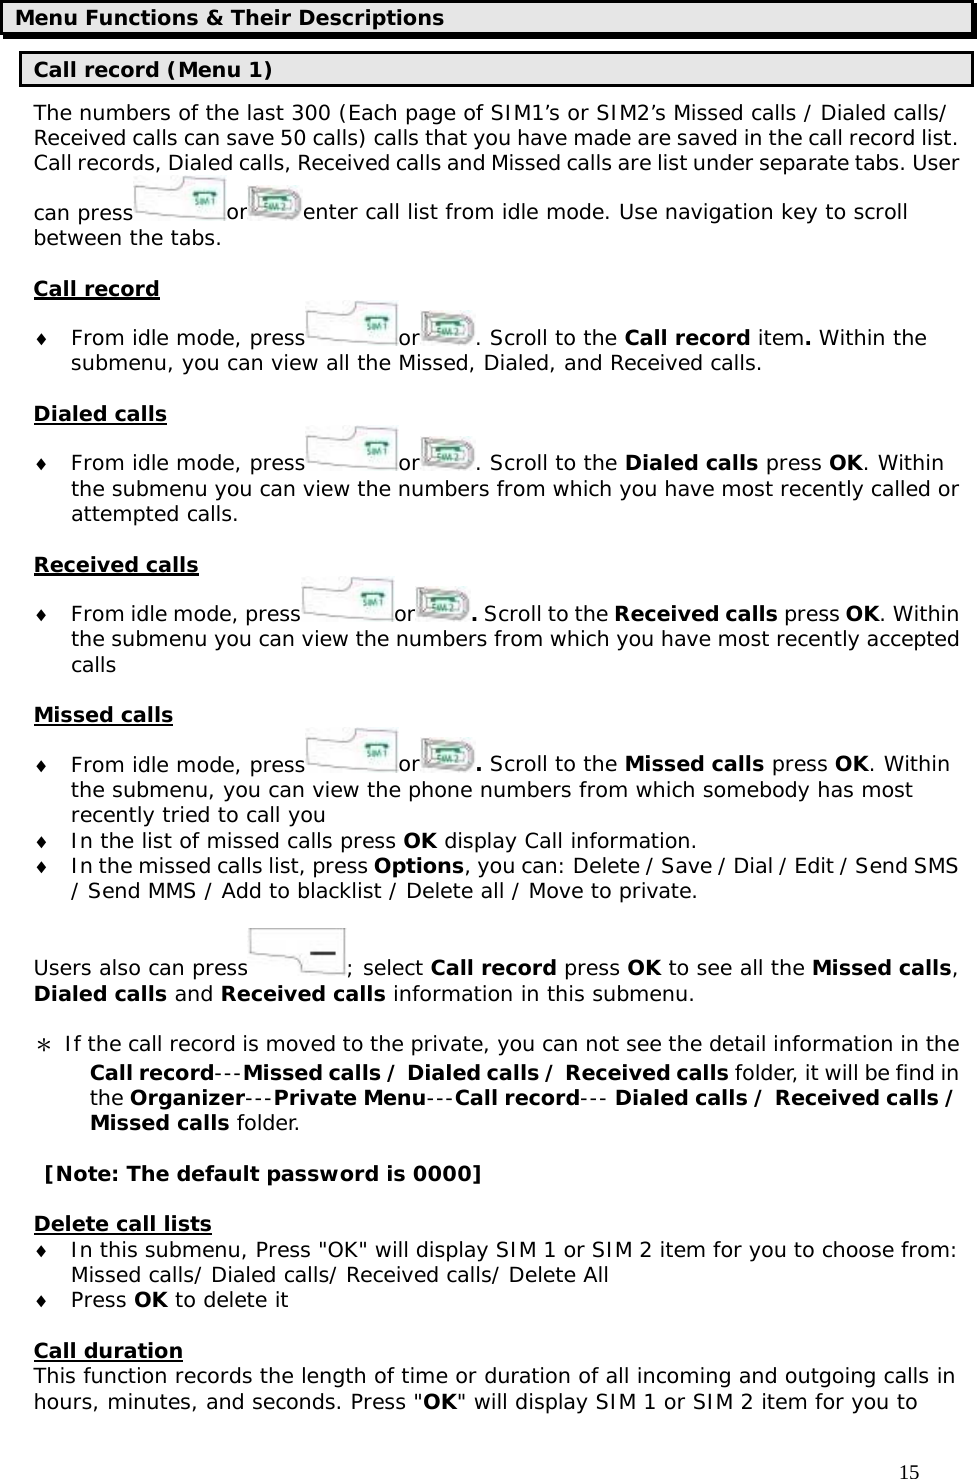                                     15 Menu Functions &amp; Their Descriptions Call record (Menu 1) The numbers of the last 300 (Each page of SIM1’s or SIM2’s Missed calls / Dialed calls/ Received calls can save 50 calls) calls that you have made are saved in the call record list. Call records, Dialed calls, Received calls and Missed calls are list under separate tabs. User can press or enter call list from idle mode. Use navigation key to scroll between the tabs.  Call record ♦ From idle mode, press or . Scroll to the Call record item. Within the submenu, you can view all the Missed, Dialed, and Received calls.  Dialed calls ♦ From idle mode, press or . Scroll to the Dialed calls press OK. Within the submenu you can view the numbers from which you have most recently called or attempted calls.  Received calls ♦ From idle mode, press or . Scroll to the Received calls press OK. Within the submenu you can view the numbers from which you have most recently accepted calls  Missed calls ♦ From idle mode, press or . Scroll to the Missed calls press OK. Within the submenu, you can view the phone numbers from which somebody has most recently tried to call you ♦ In the list of missed calls press OK display Call information. ♦ In the missed calls list, press Options, you can: Delete / Save / Dial / Edit / Send SMS / Send MMS / Add to blacklist / Delete all / Move to private.  Users also can press ; select Call record press OK to see all the Missed calls, Dialed calls and Received calls information in this submenu.  ＊ If the call record is moved to the private, you can not see the detail information in the Call record---Missed calls / Dialed calls / Received calls folder, it will be find in the Organizer---Private Menu---Call record--- Dialed calls / Received calls / Missed calls folder.  [Note: The default password is 0000]  Delete call lists ♦ In this submenu, Press &quot;OK&quot; will display SIM 1 or SIM 2 item for you to choose from: Missed calls/ Dialed calls/ Received calls/ Delete All ♦ Press OK to delete it  Call duration This function records the length of time or duration of all incoming and outgoing calls in hours, minutes, and seconds. Press &quot;OK&quot; will display SIM 1 or SIM 2 item for you to 